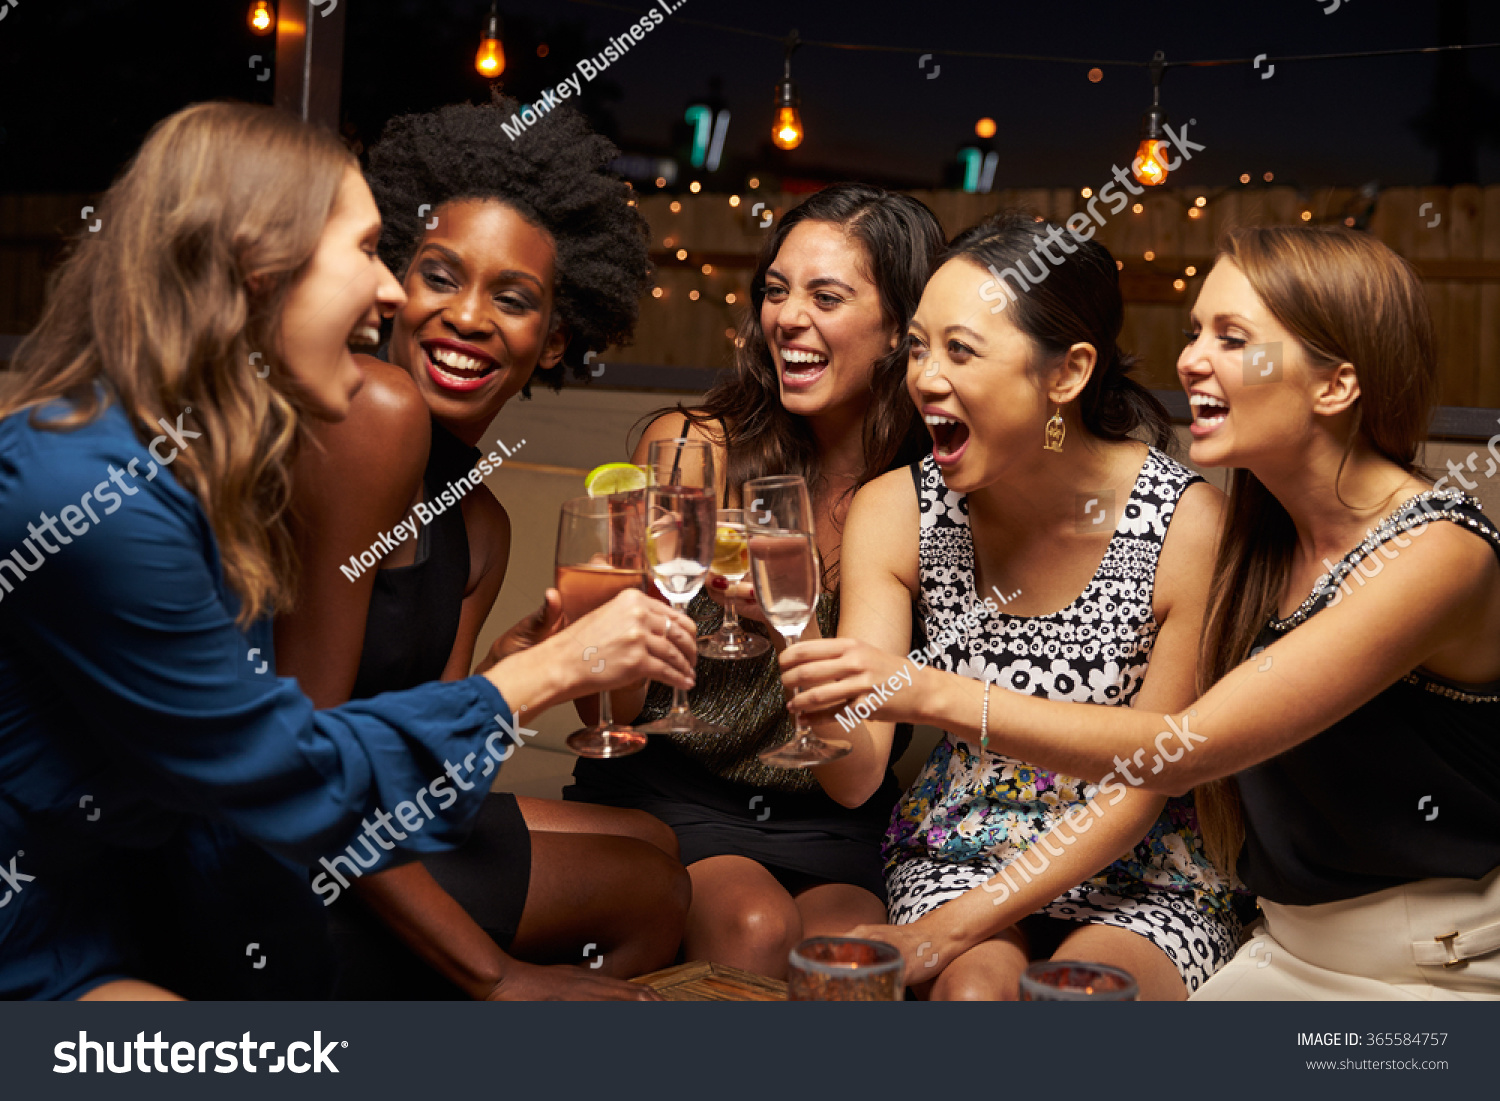 660,229 Girls' Night Out Images, Stock Photos & Vectors | Shutterstock